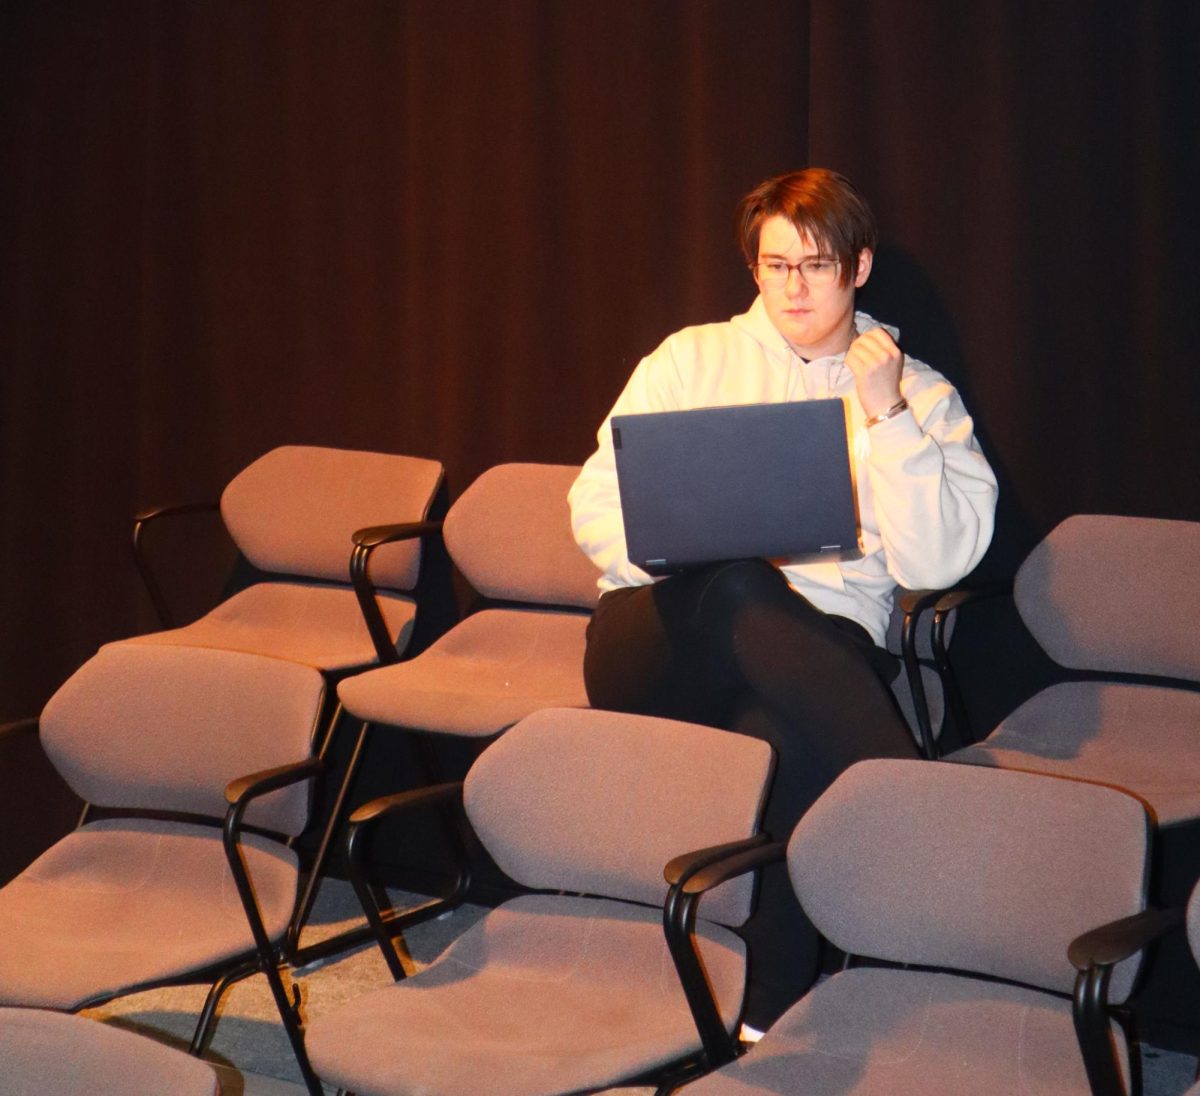 Senior Grey White, director of “Private Lives,” works on auditions in the Black Box Theatre on Feb 15.